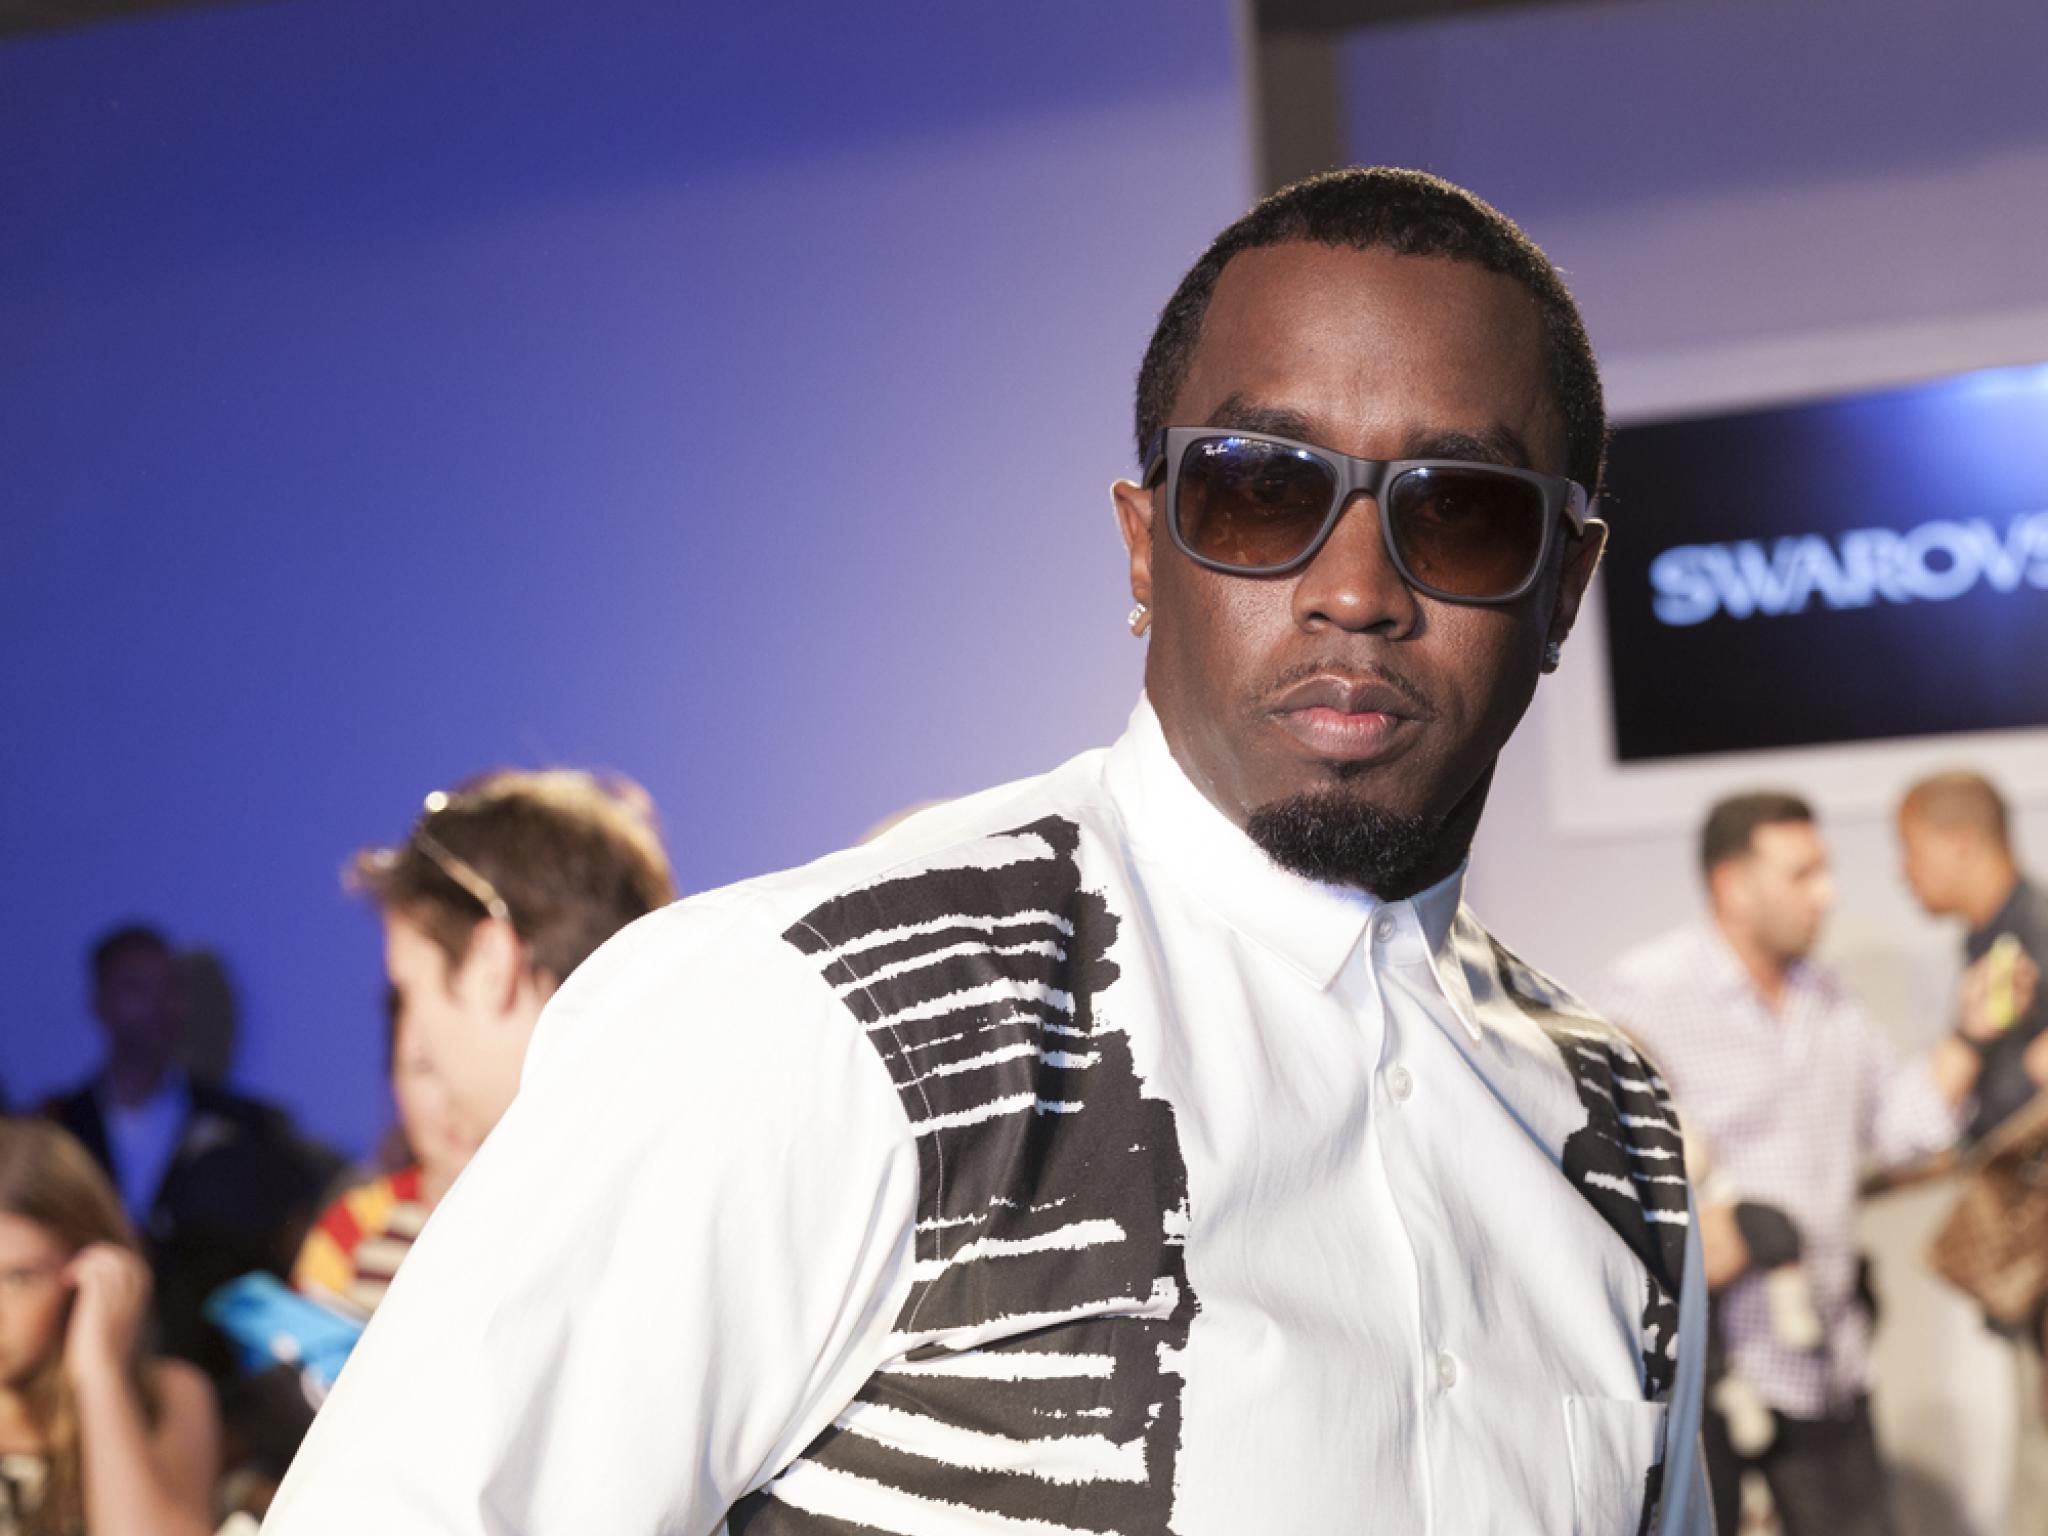  diddy-do-it-documentary-on-embattled-rapper-snapped-up-by-worlds-biggest-streaming-platform-report 